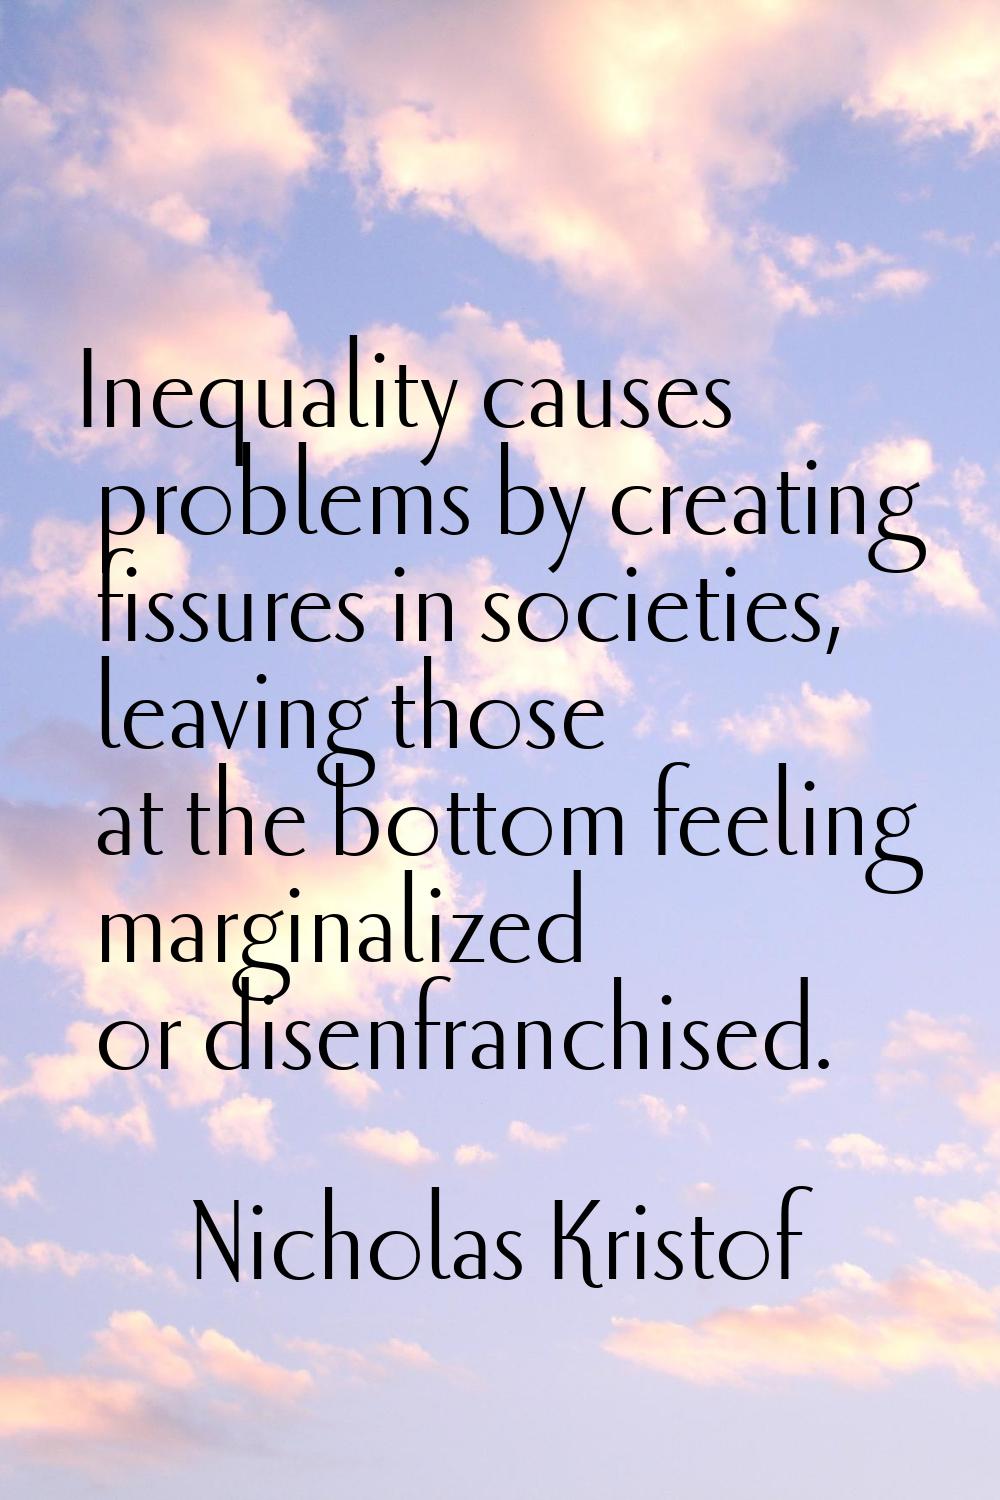 Inequality causes problems by creating fissures in societies, leaving those at the bottom feeling m